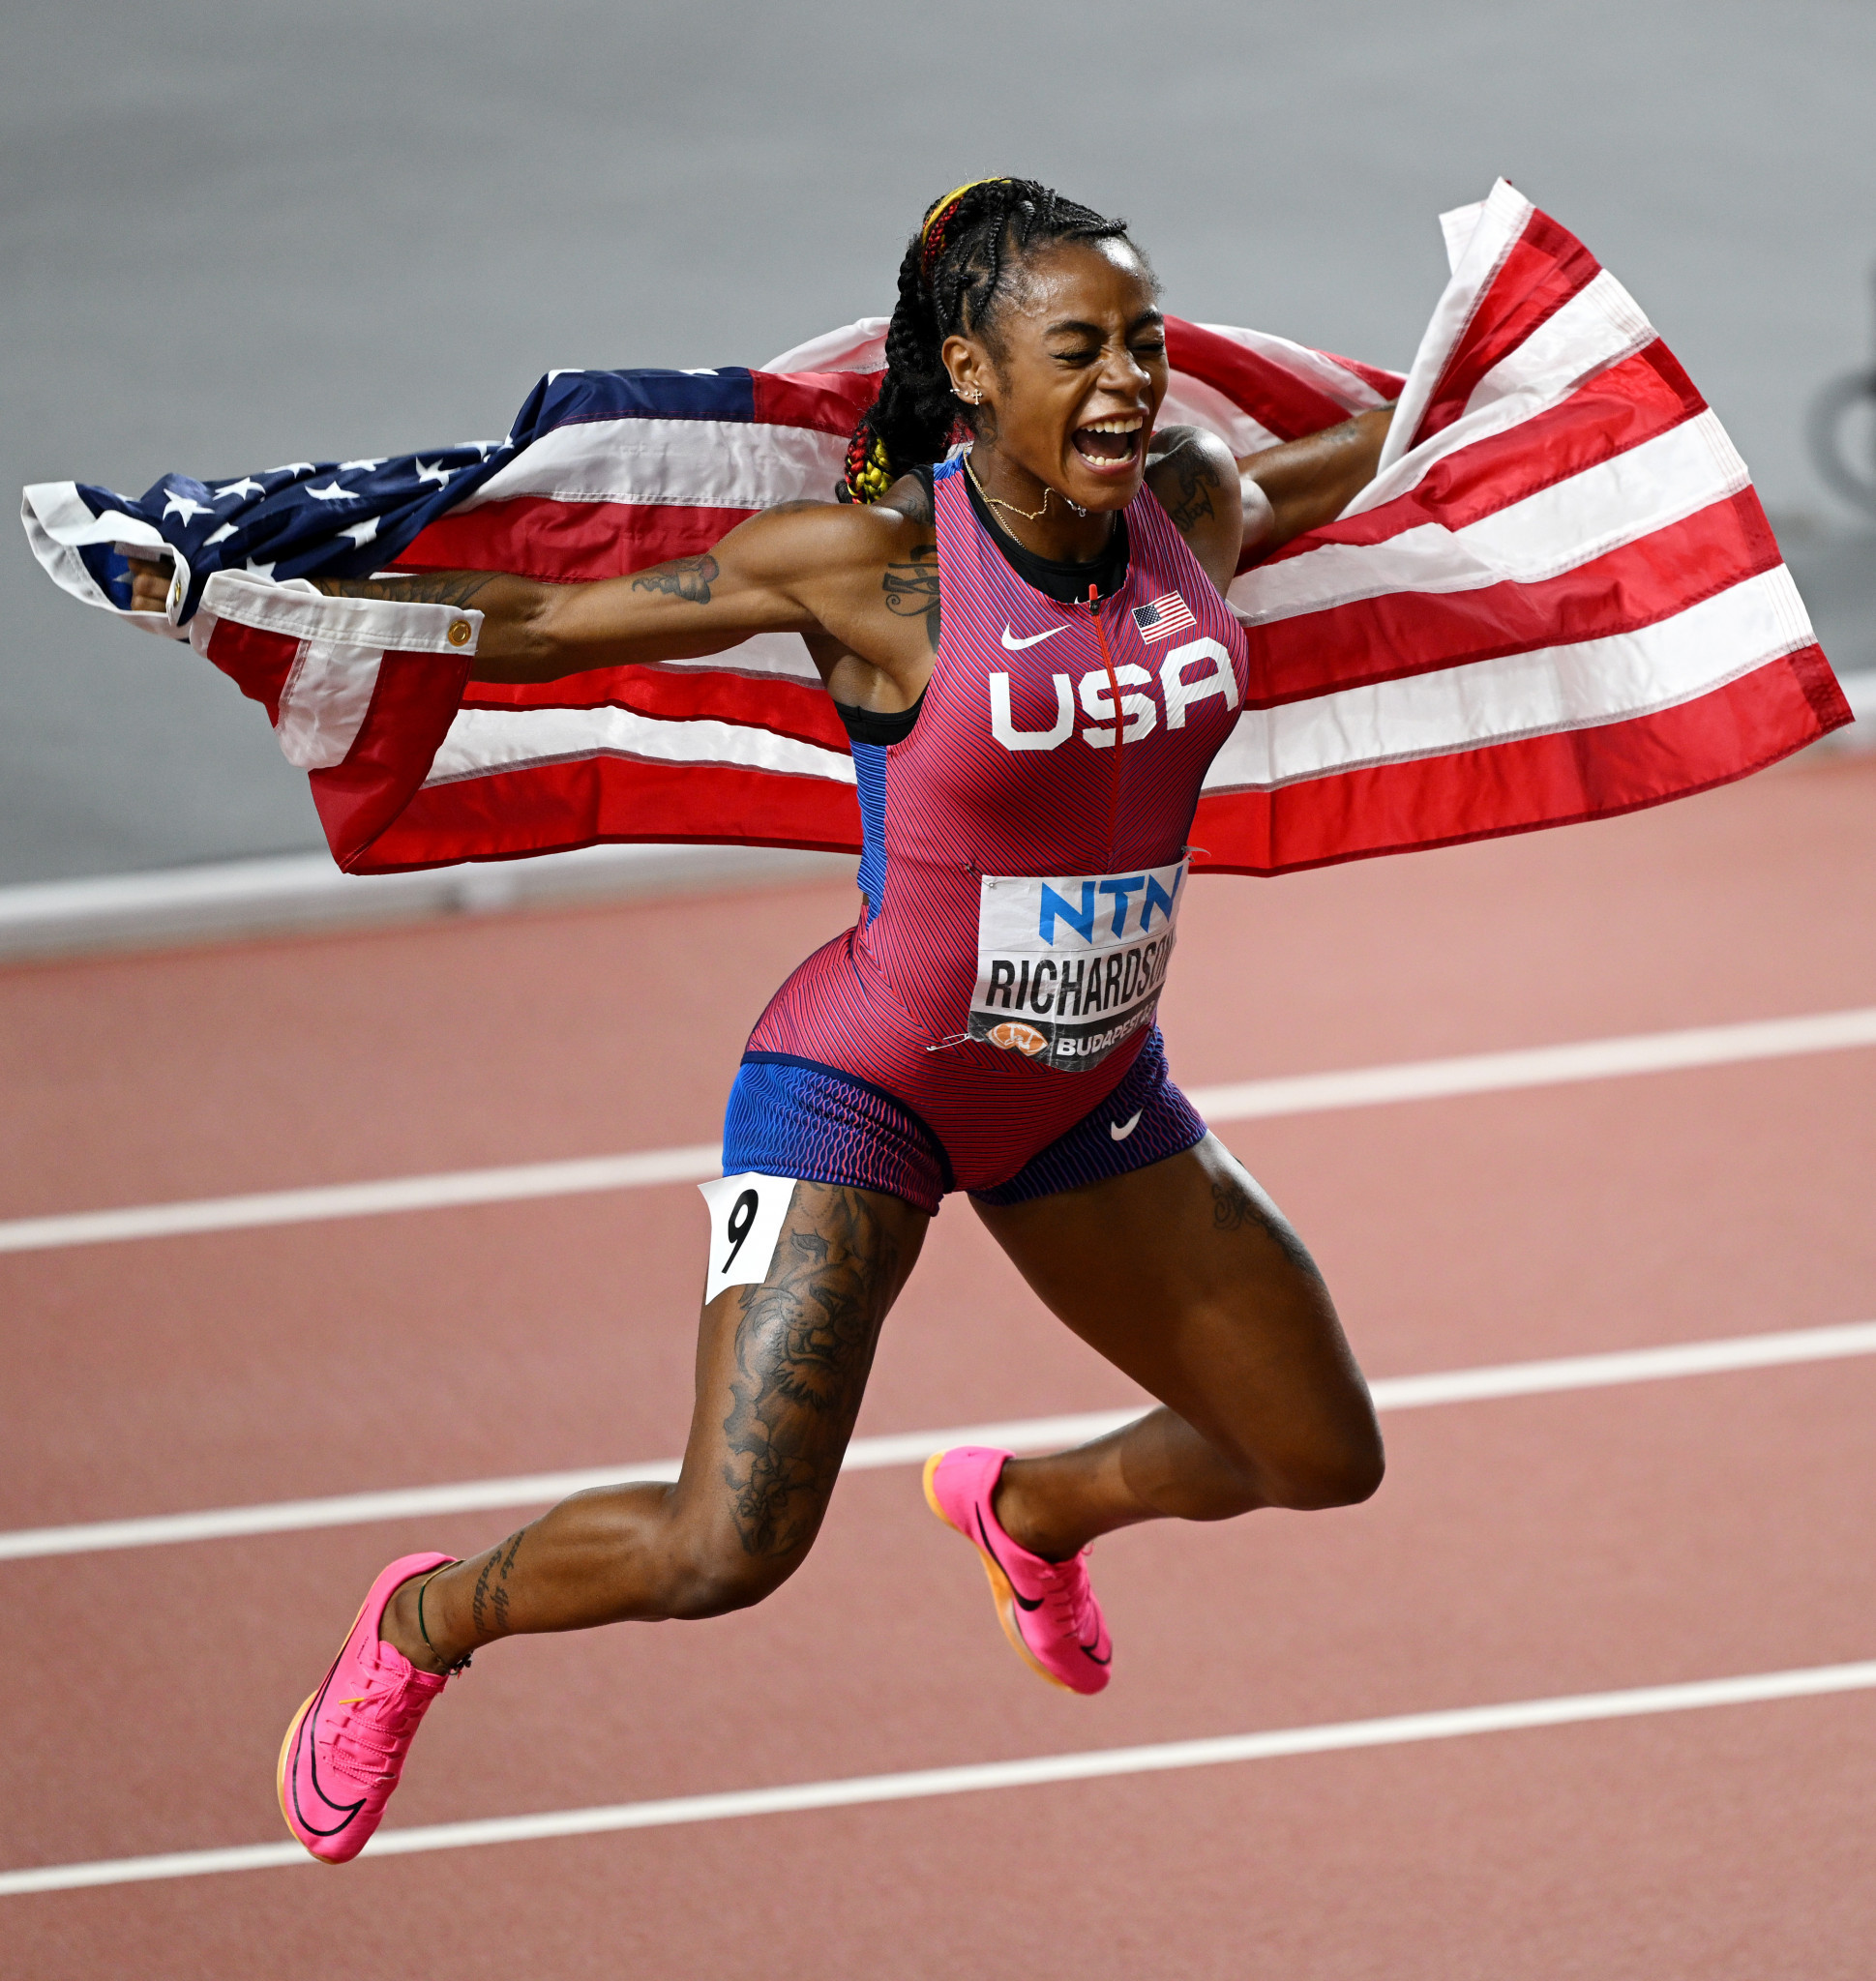 Sha'Carri Richardson of the US set a Championships record of 10.65 to win the women's 100m final ©Getty Images